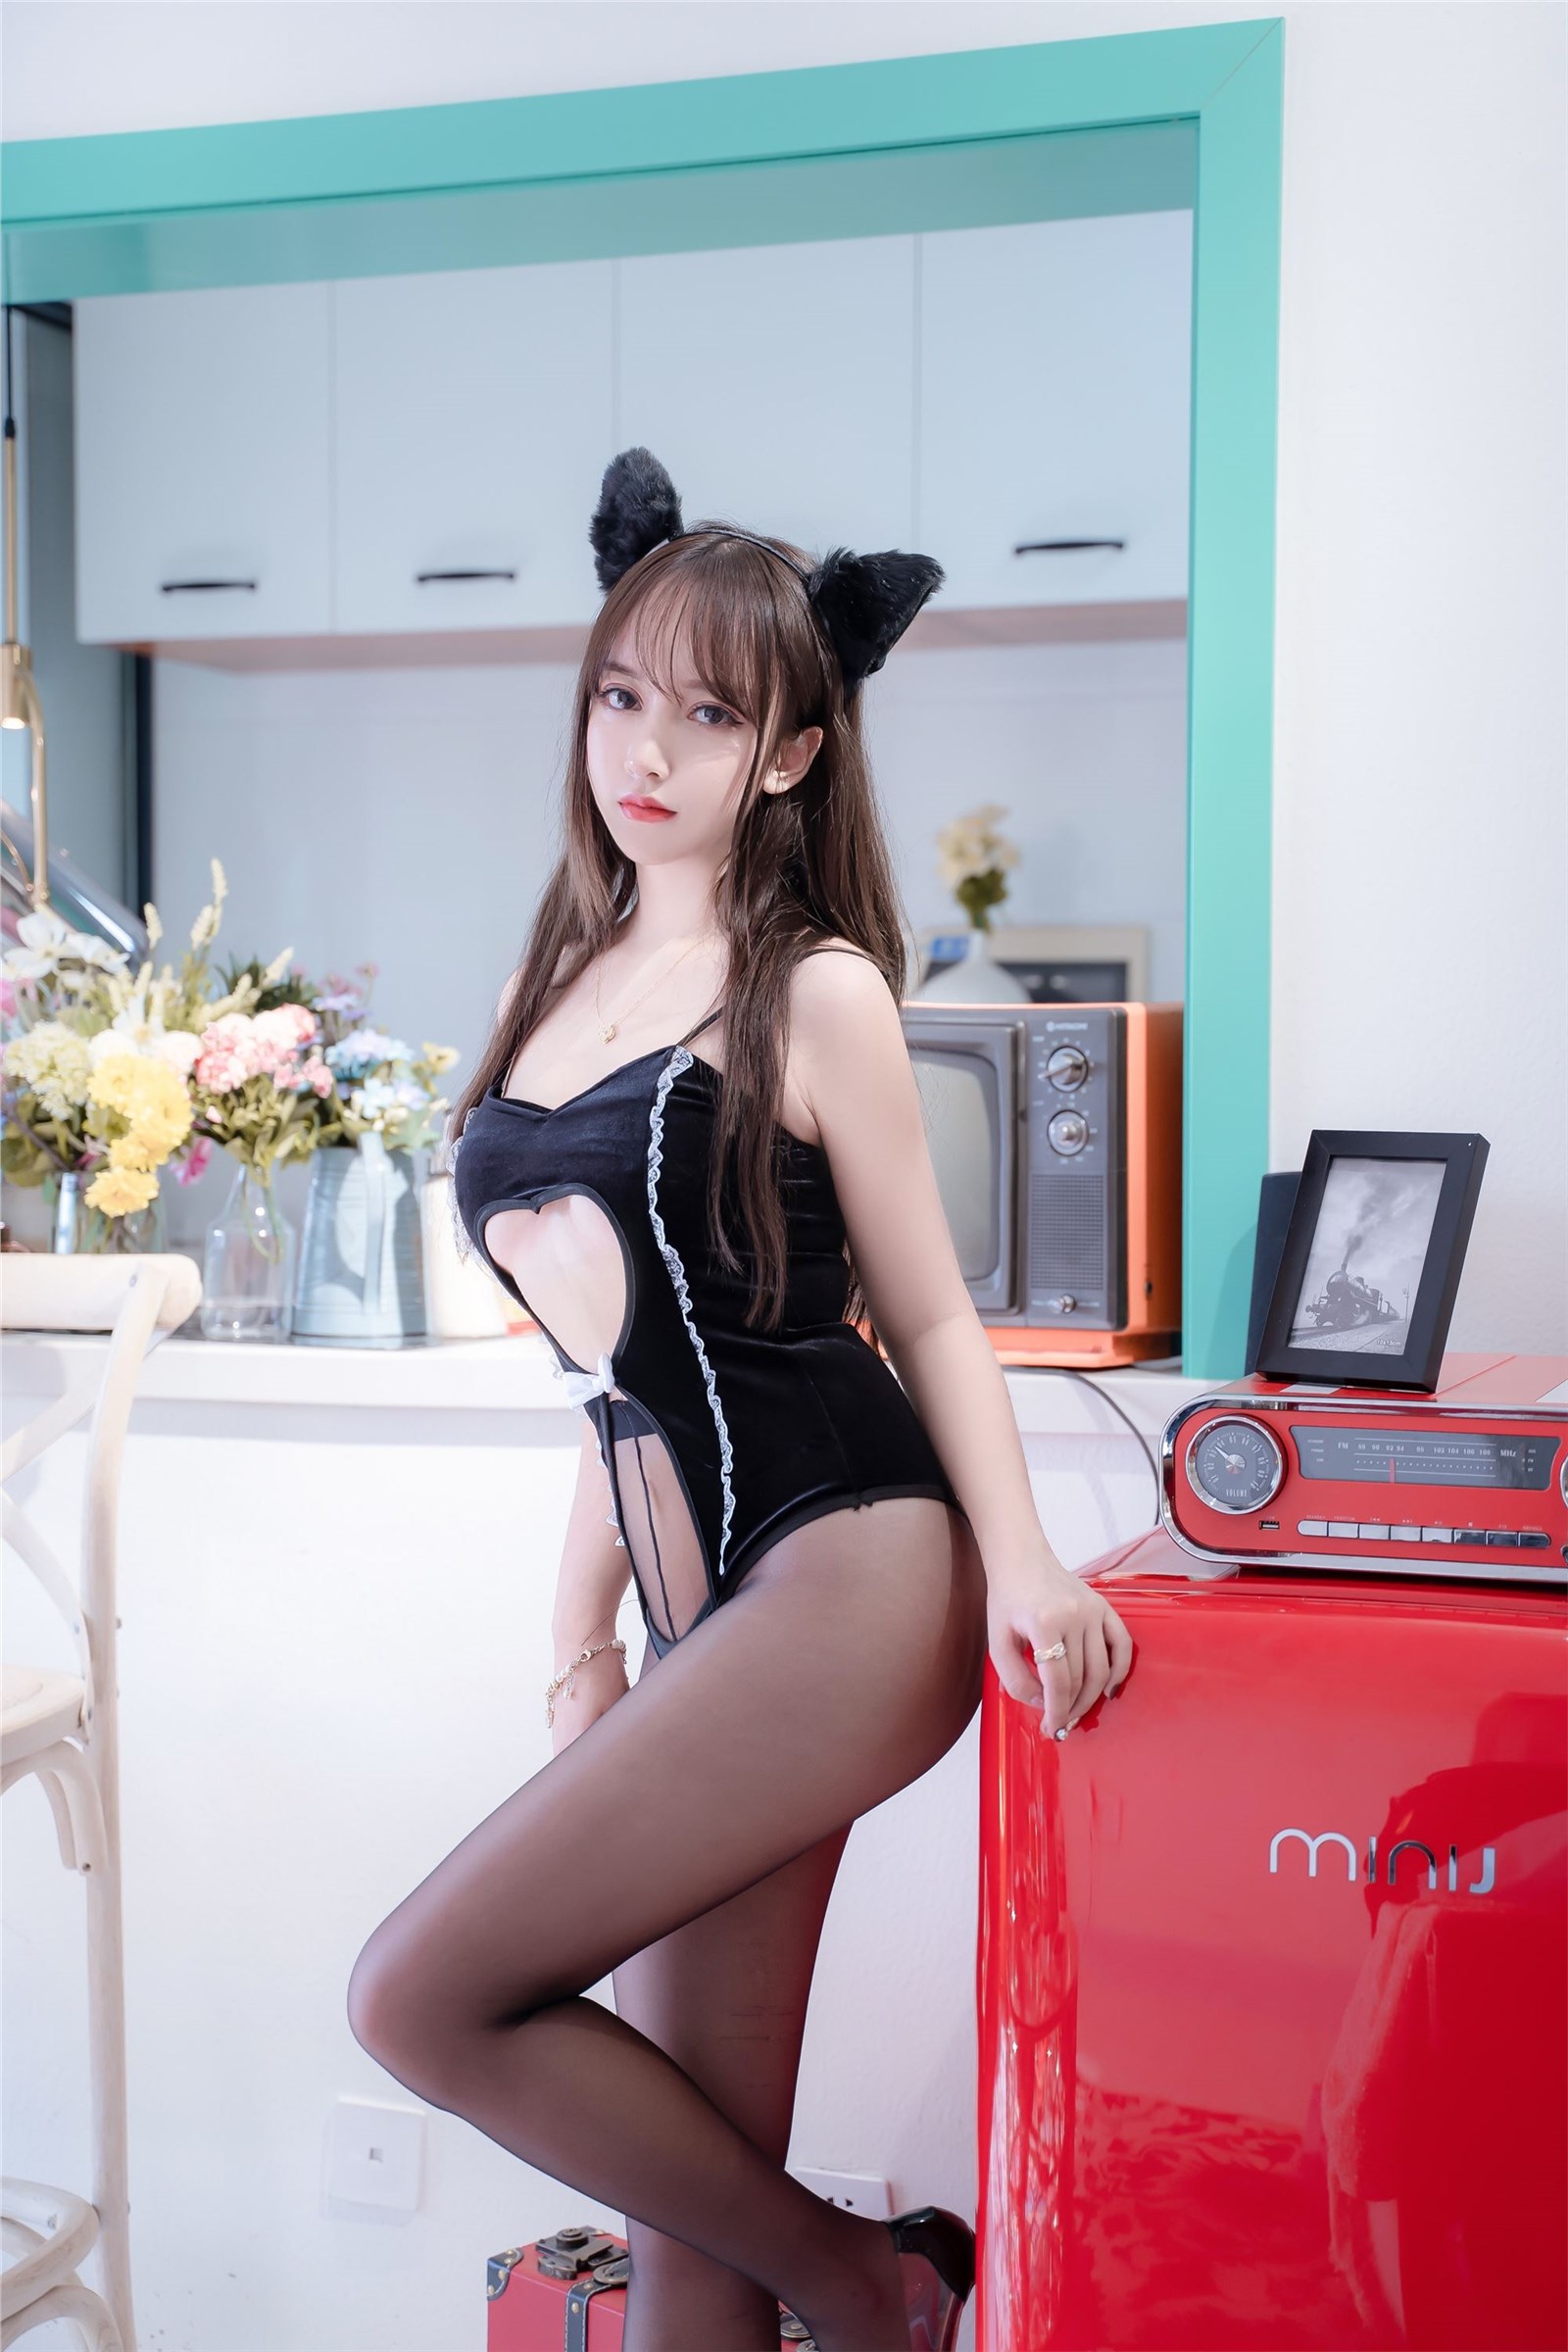 Expired Rice Noodles Meow Rice Noodles - Cat Girl(2)